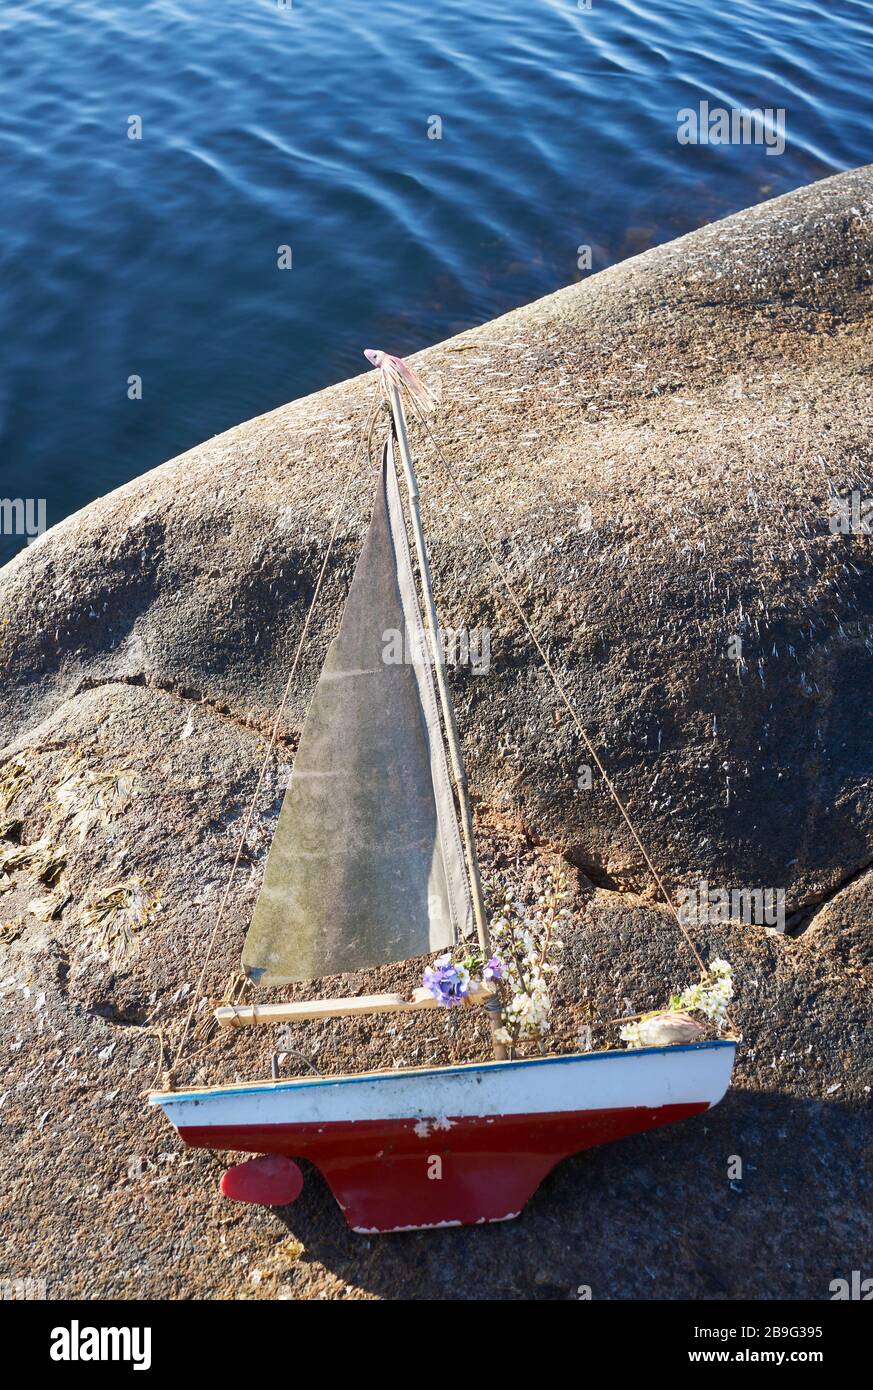 Toy sailboat with flowers on lakeside rock Stock Photo